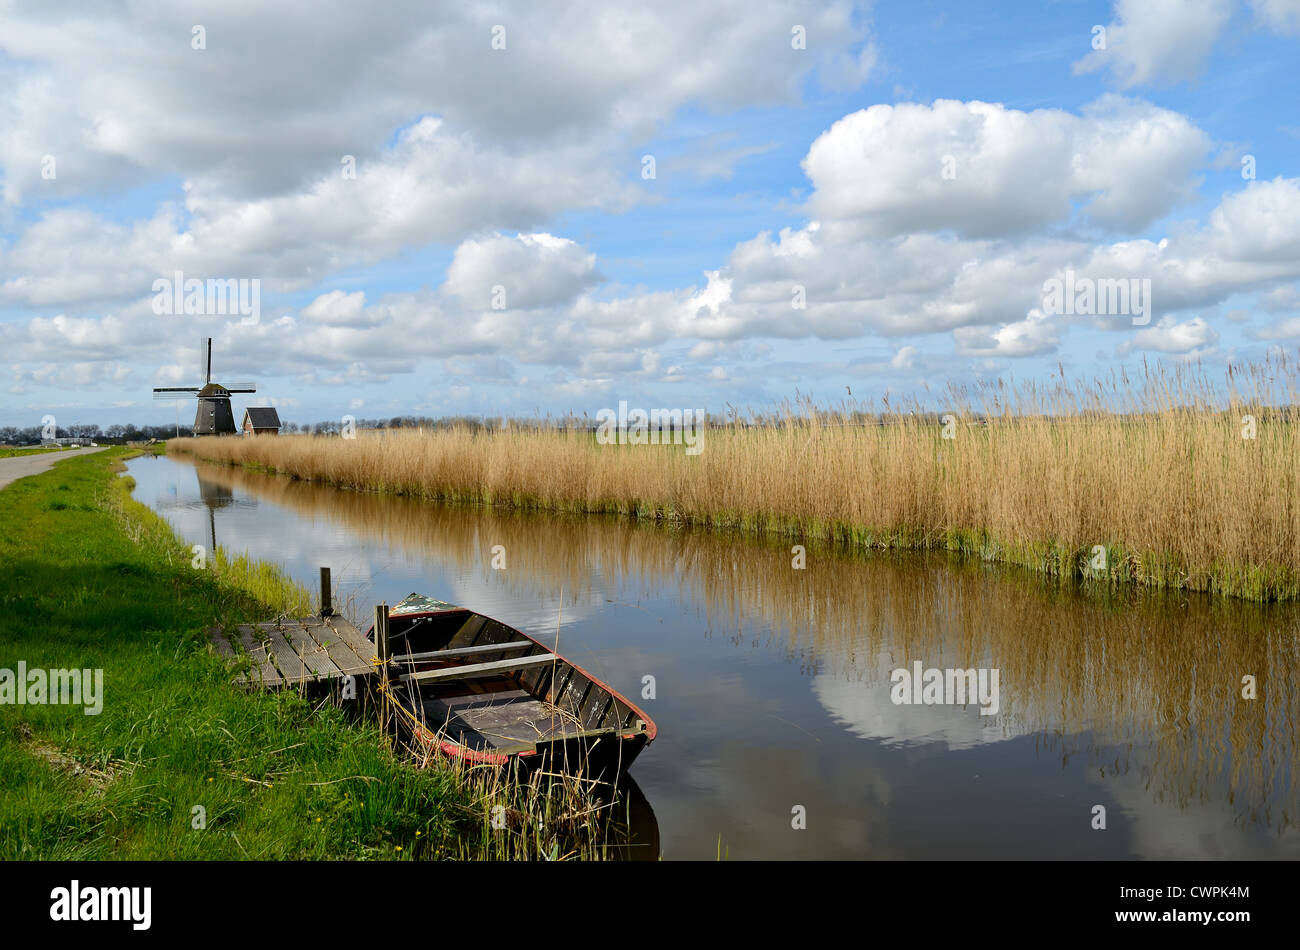 Typical landscape in Holland with an old boat in a ditch with a windmill, reeds and clouds. Stock Photo